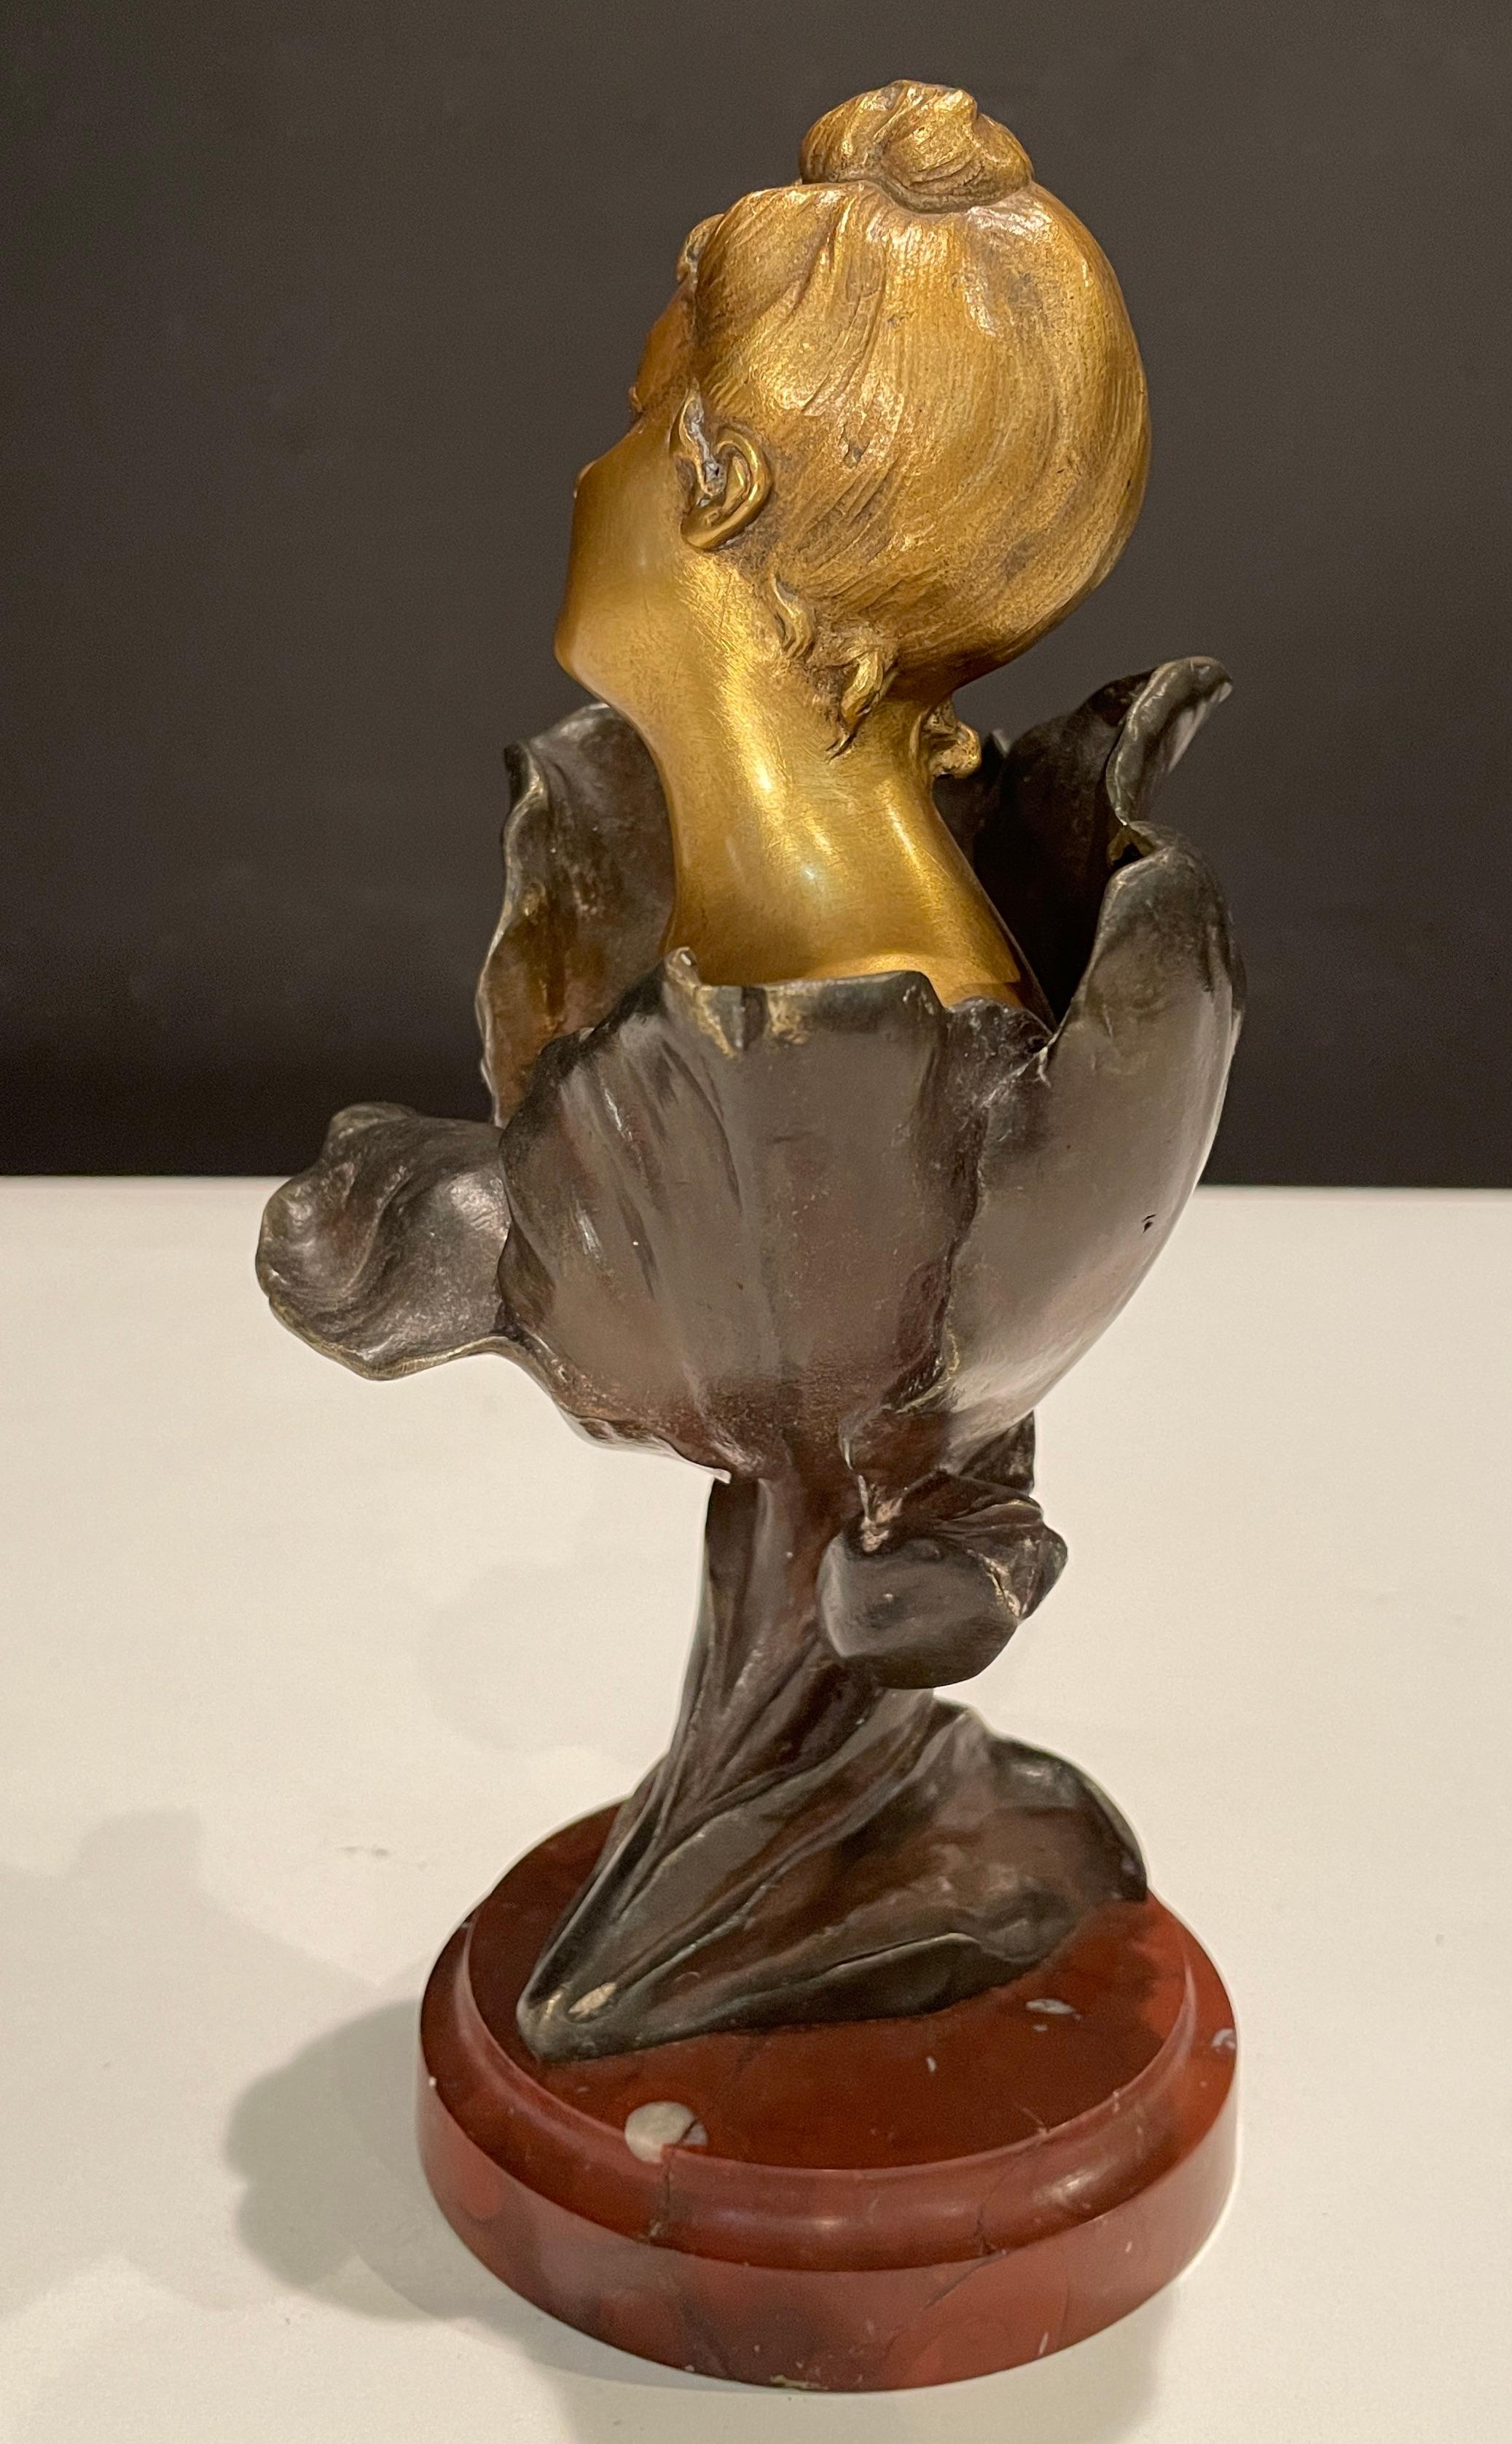 Gilt And Patinated Bronze Bust By Henri Godet “Femme Tulipe” In Good Condition For Sale In Norwood, NJ